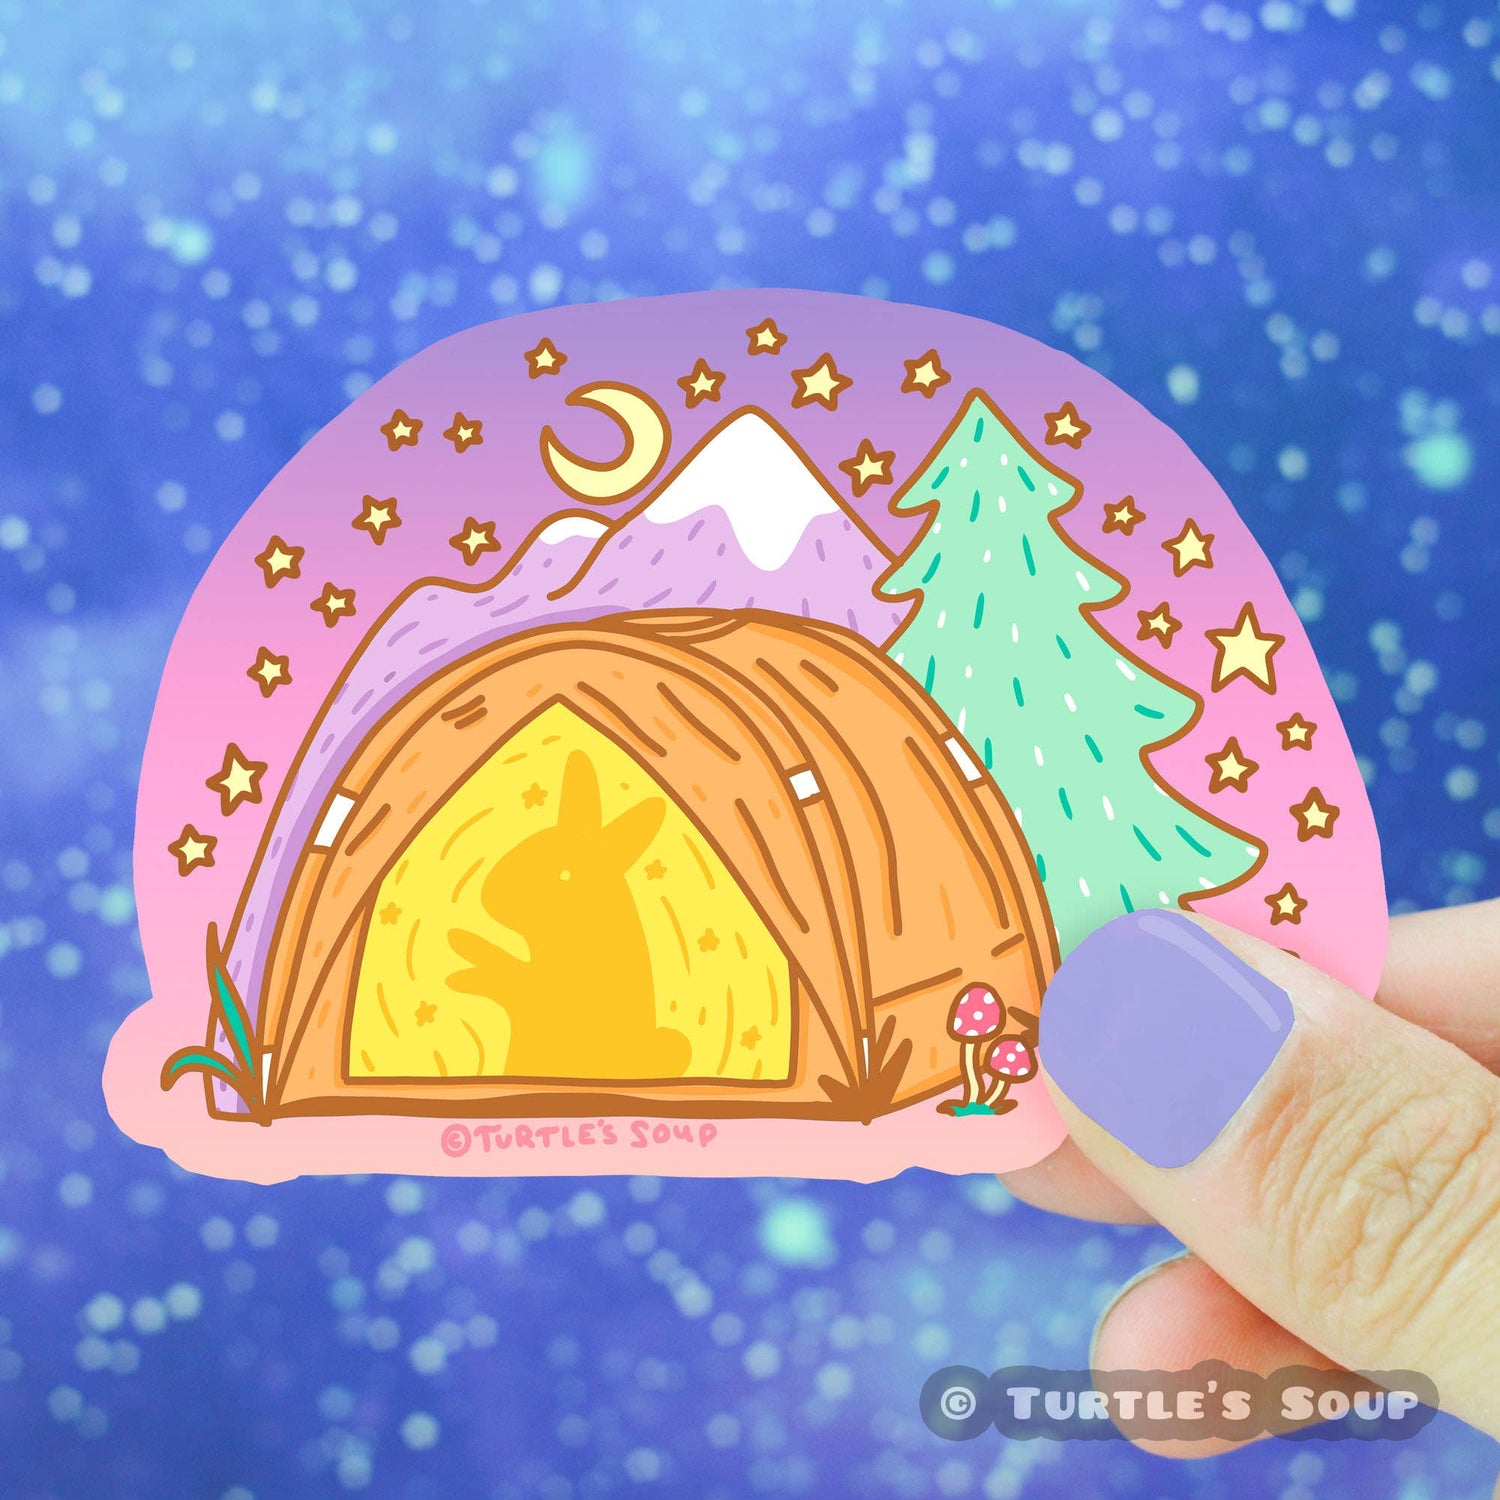 Camping bunny night time tent sticker by Turtle's Soup